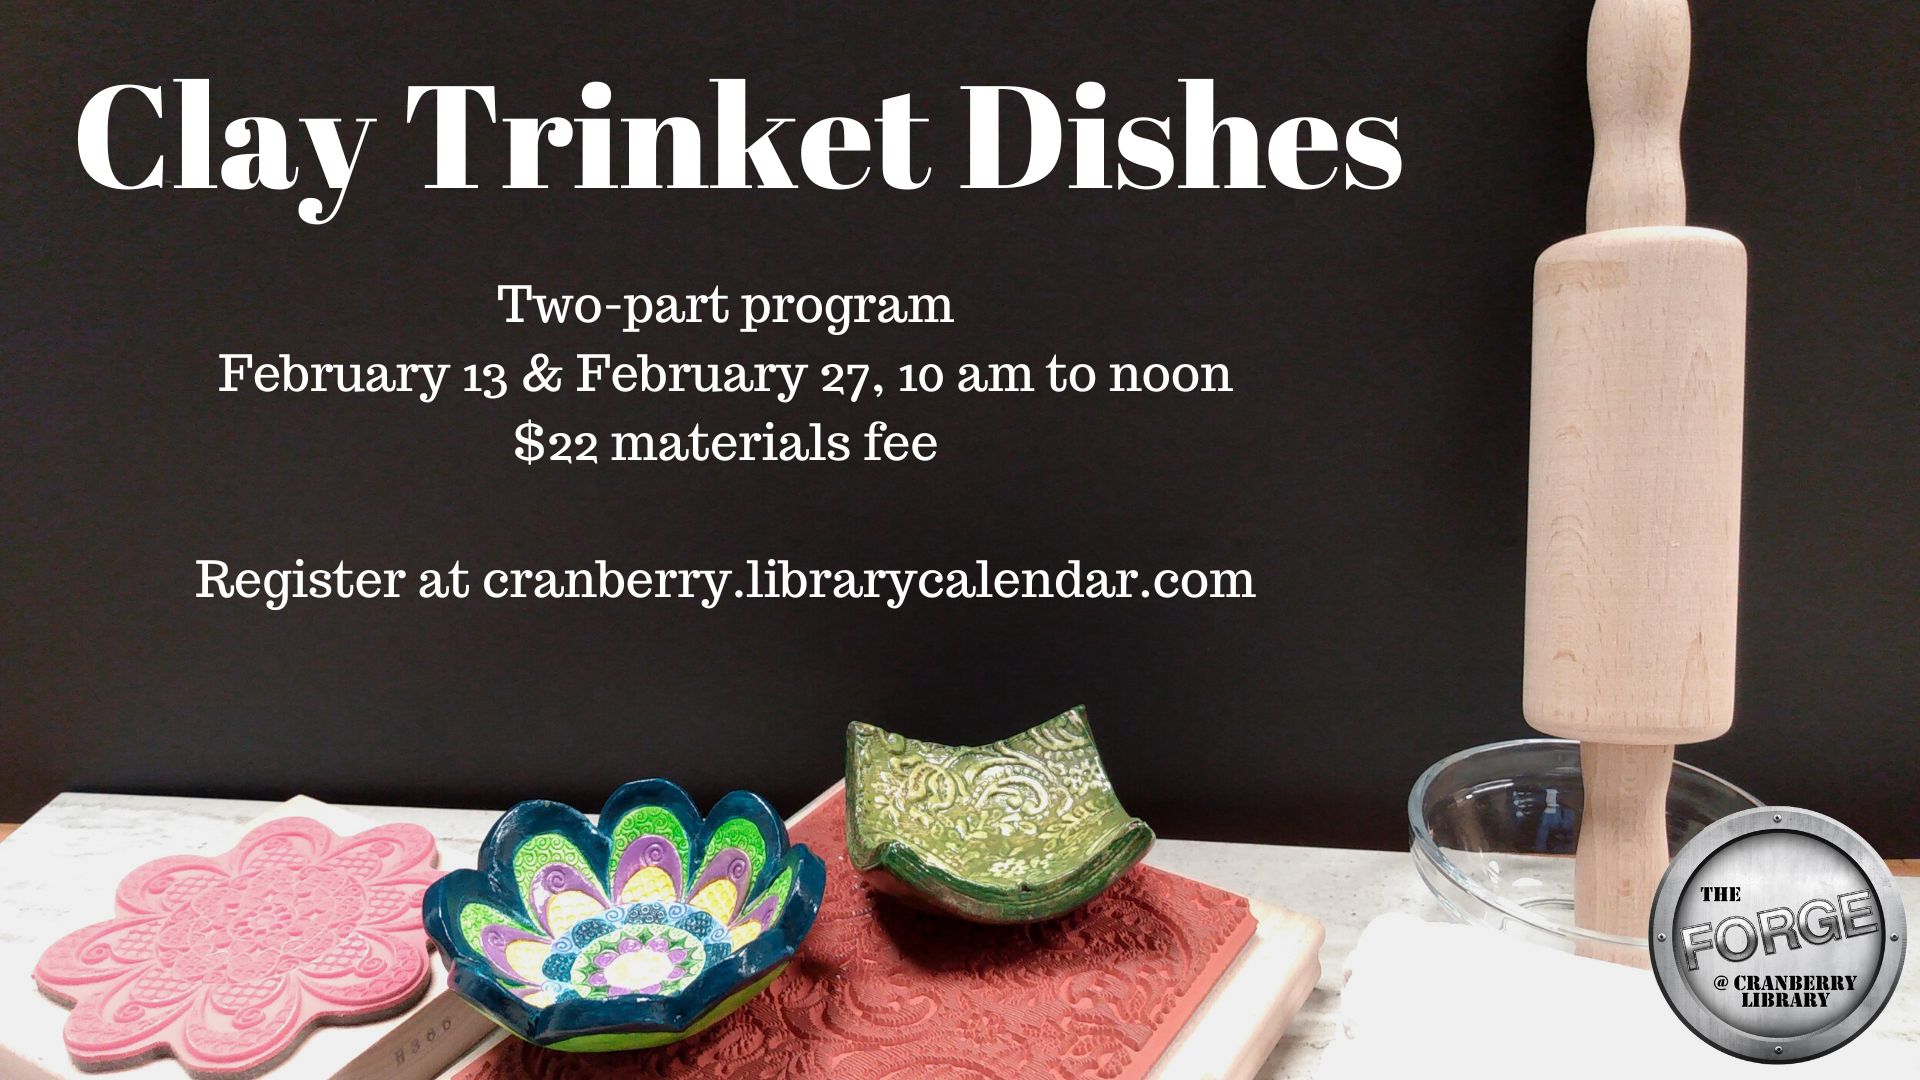 Flyer for Clay Trinket Dishes program